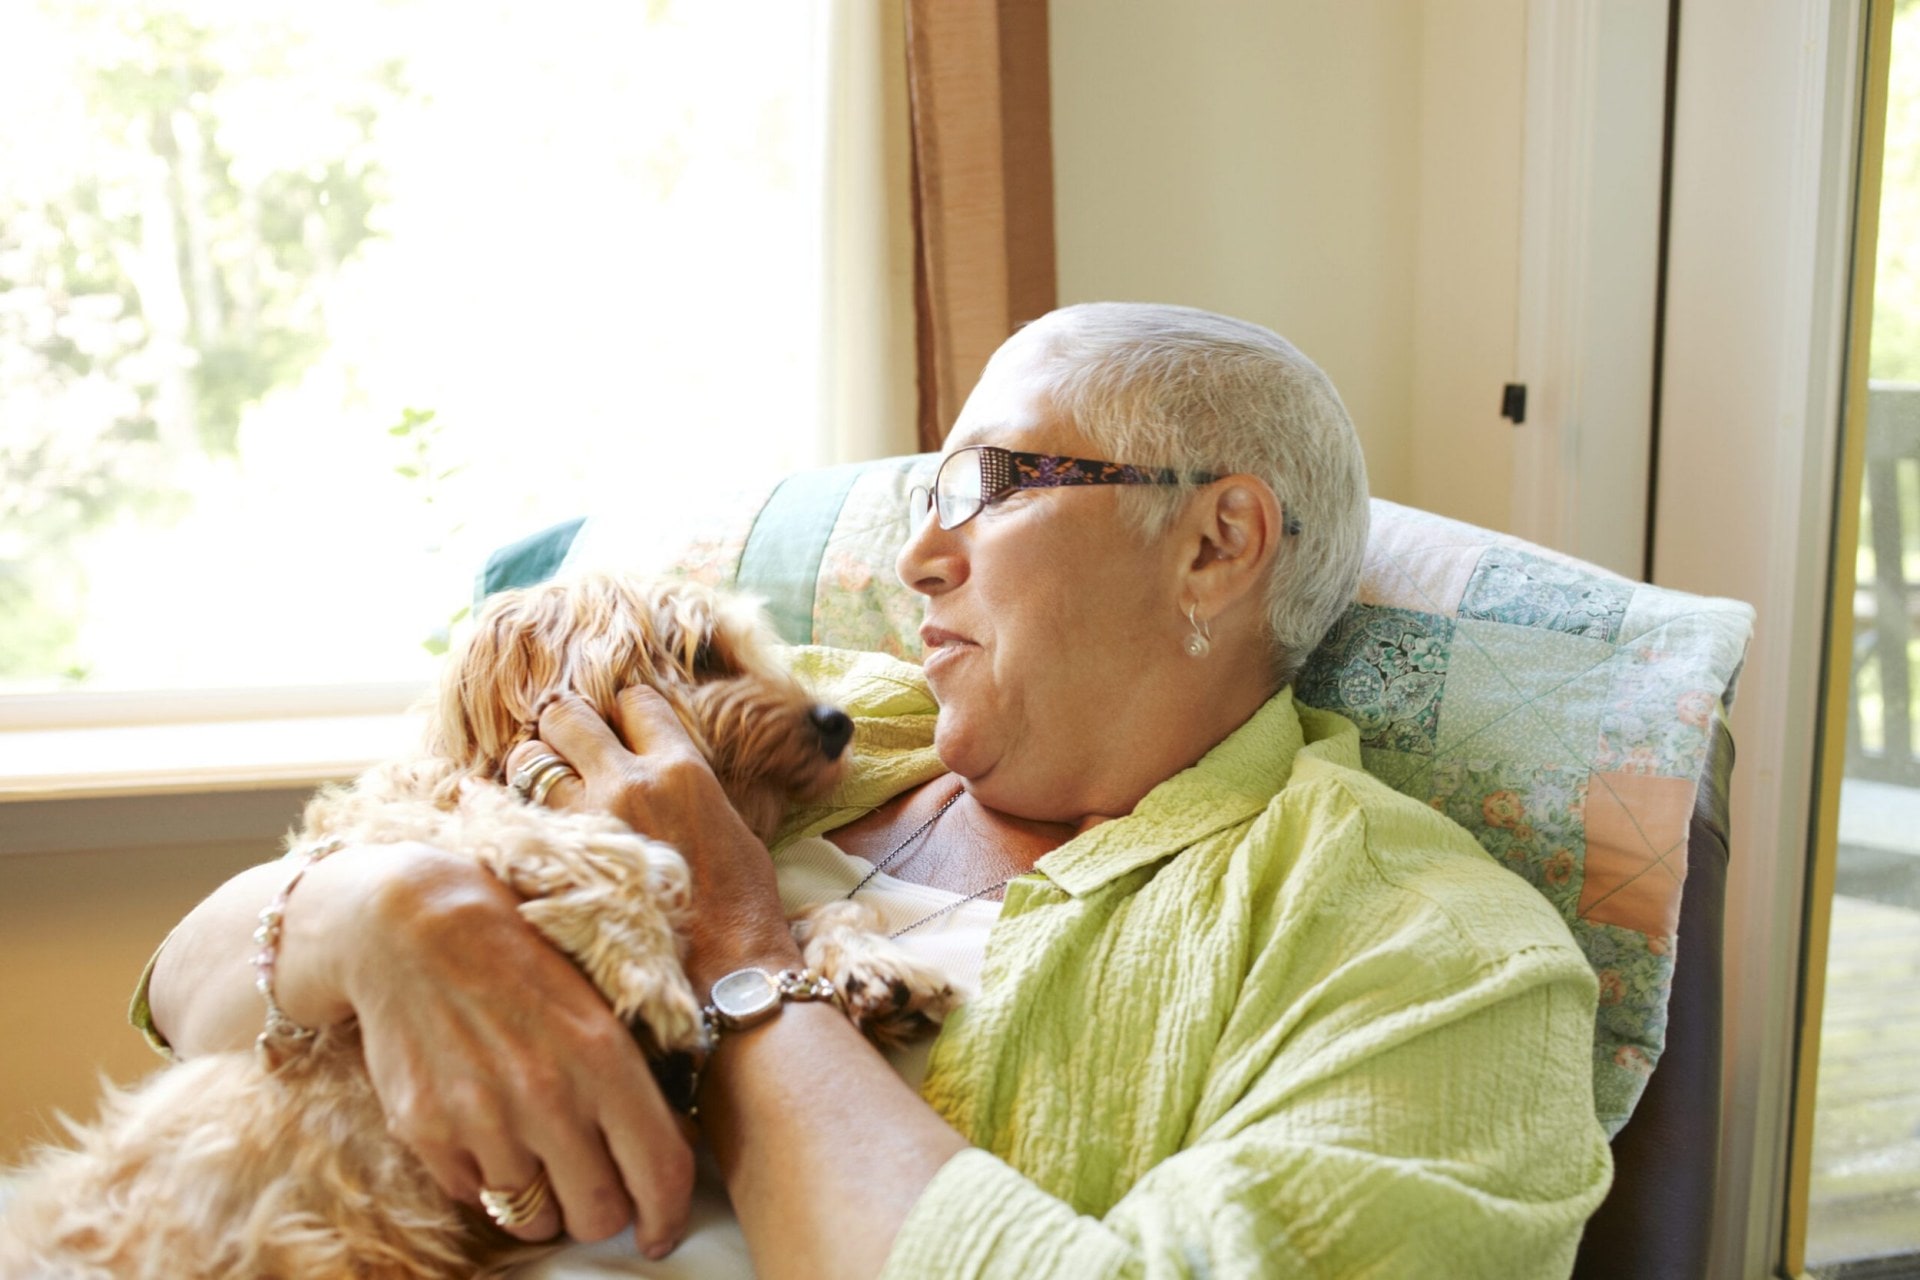 Elderly lady sitting in an armchair holding a tan dog